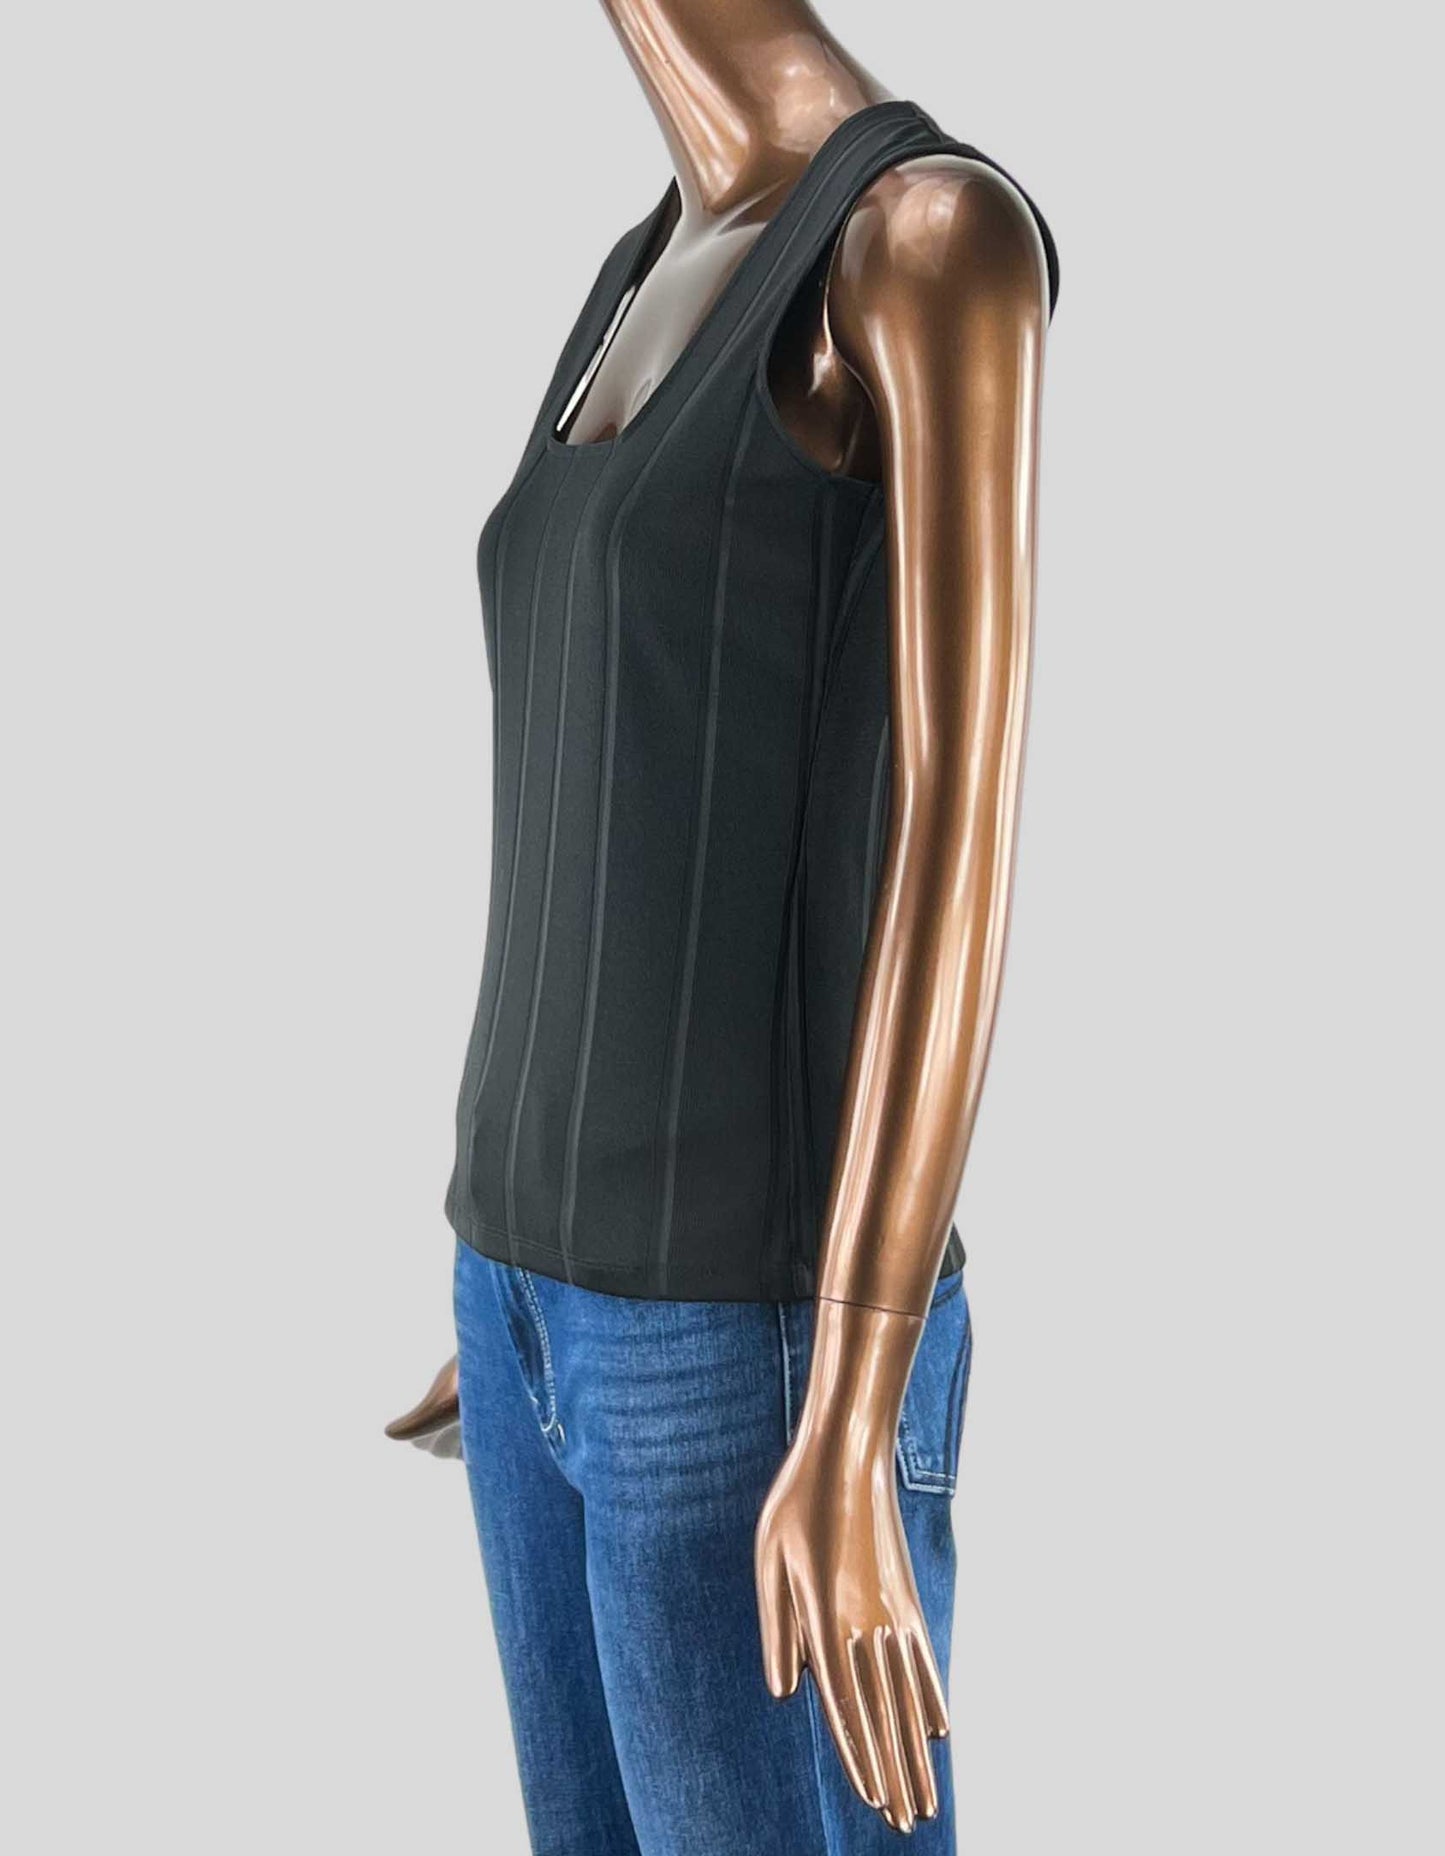 THEORY Squareneck Sleeveless Knit Top - Small